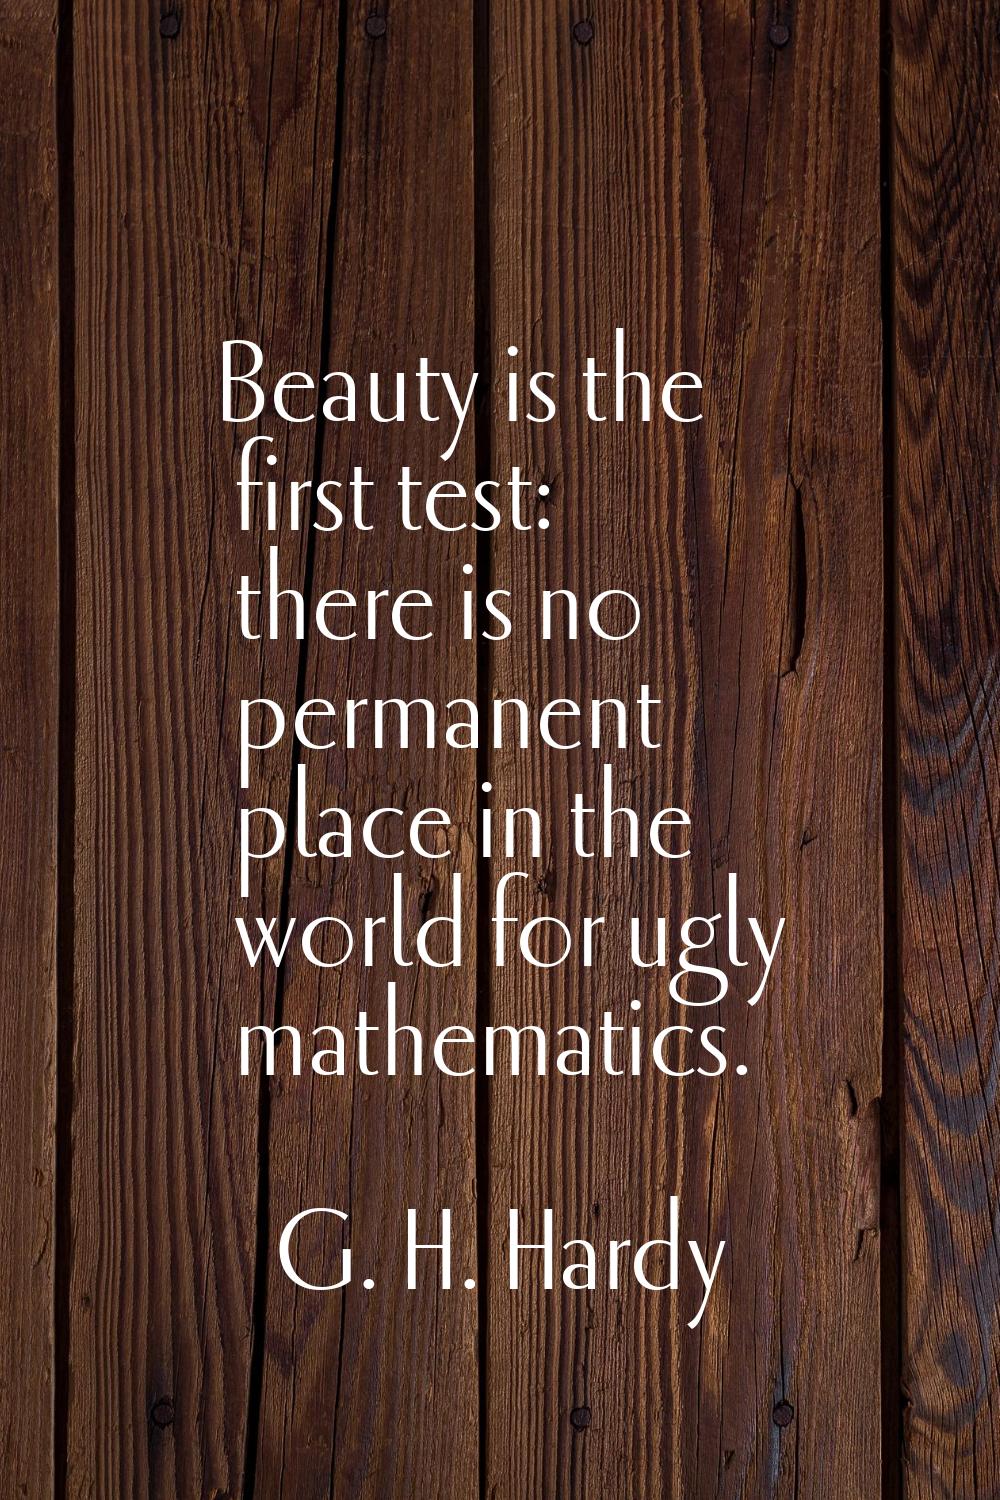 Beauty is the first test: there is no permanent place in the world for ugly mathematics.